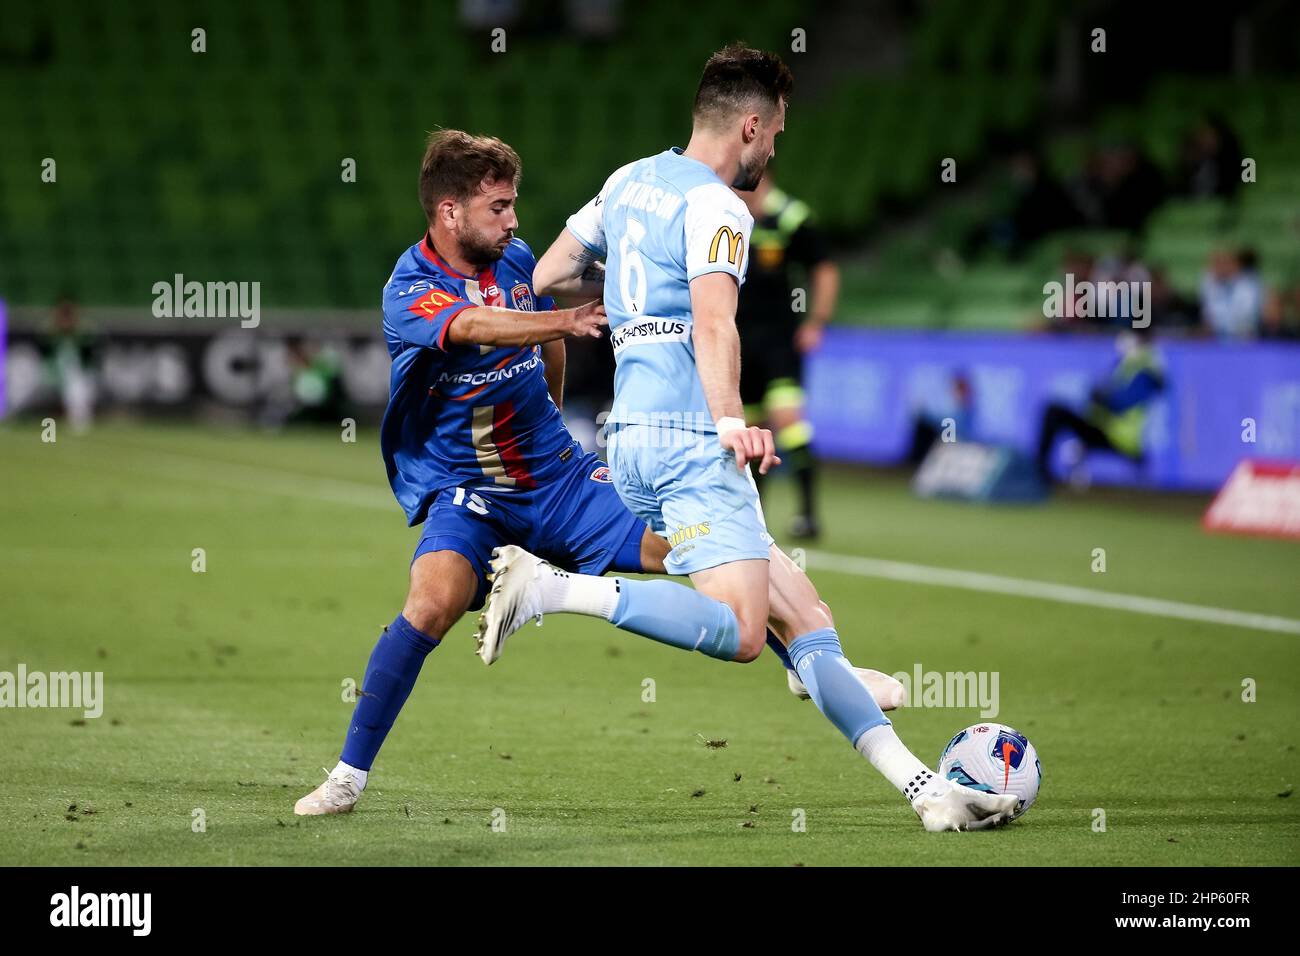 Melbourne, Australia, 18 February, 2022. Carl Jenkinson of Melbourne City FC kicks the ball during the A-League soccer match between Melbourne City FC and Newcastle Jets at AAMI Park on February 18, 2022 in Melbourne, Australia. Credit: Dave Hewison/Speed Media/Alamy Live News Stock Photo